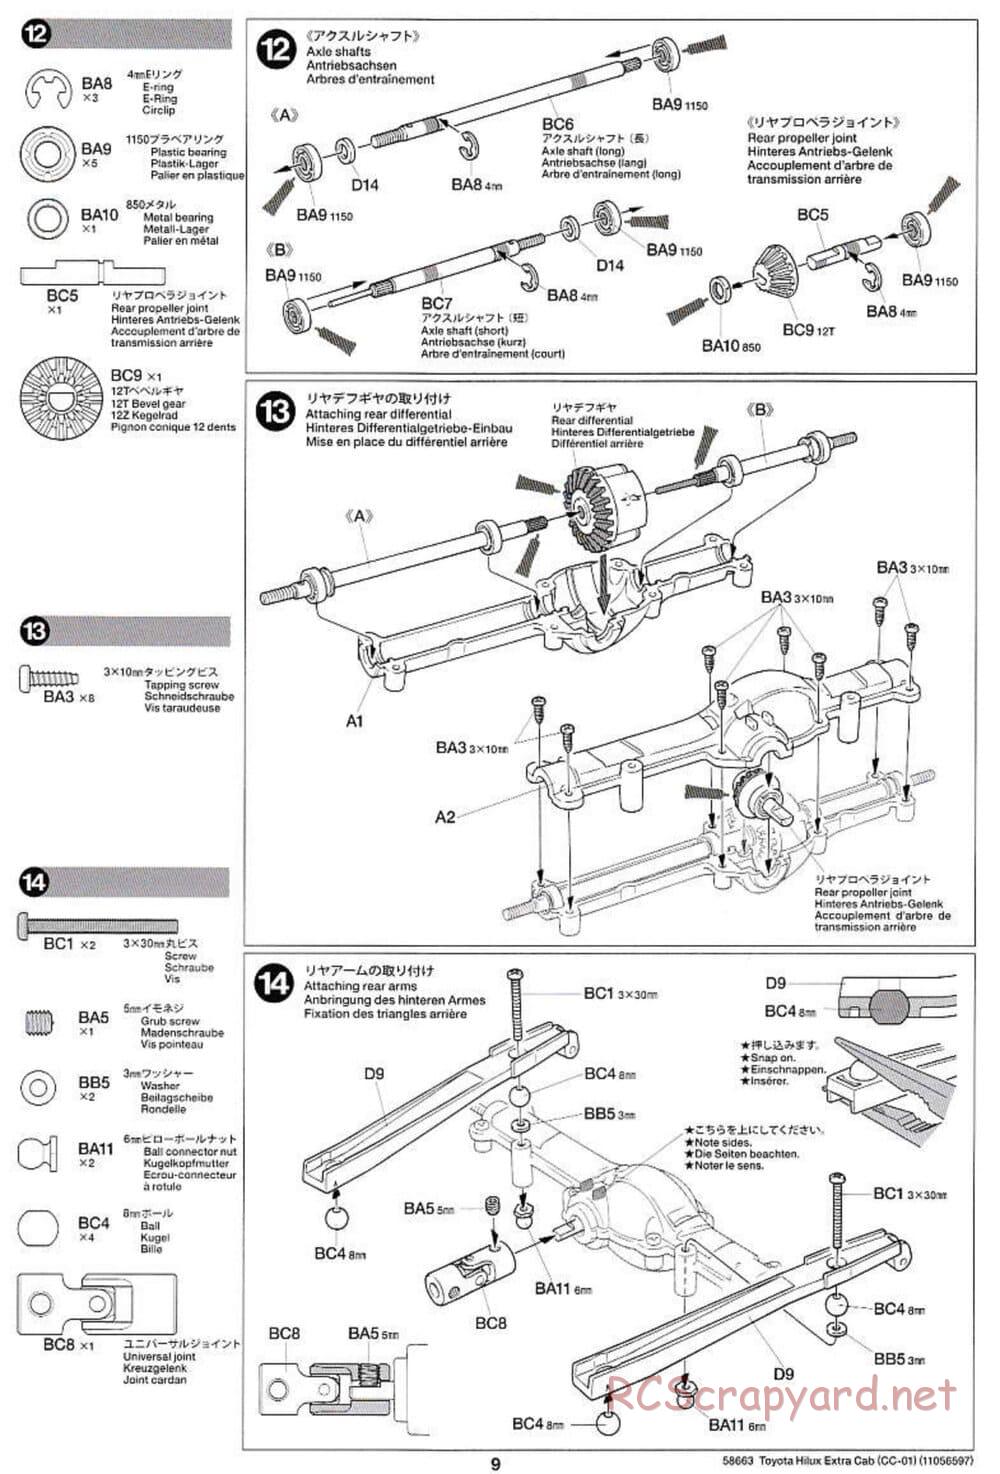 Tamiya - Toyota Hilux Extra Cab - CC-01 Chassis - Manual - Page 9